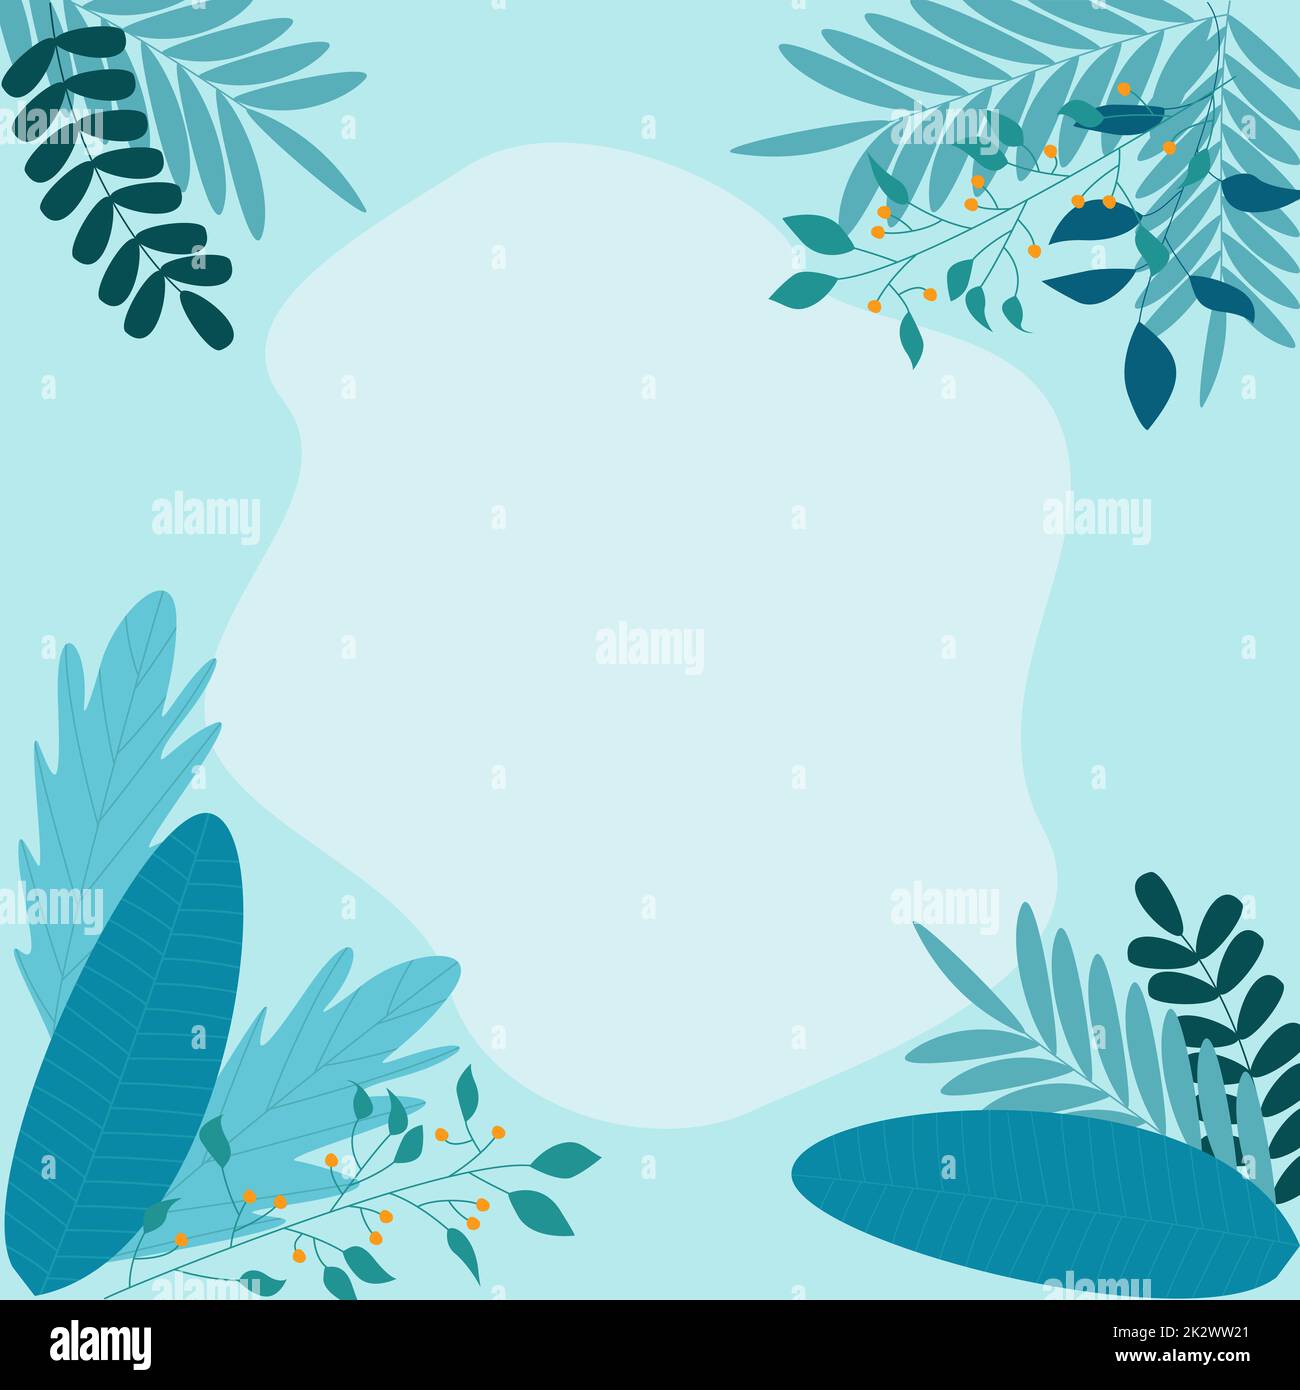 Blank Frame Decorated With Abstract Modernized Forms Flowers And Foliage. Empty Modern Border Surrounded By Multicolored Line Symbols Organized Pleasantly. Stock Photo